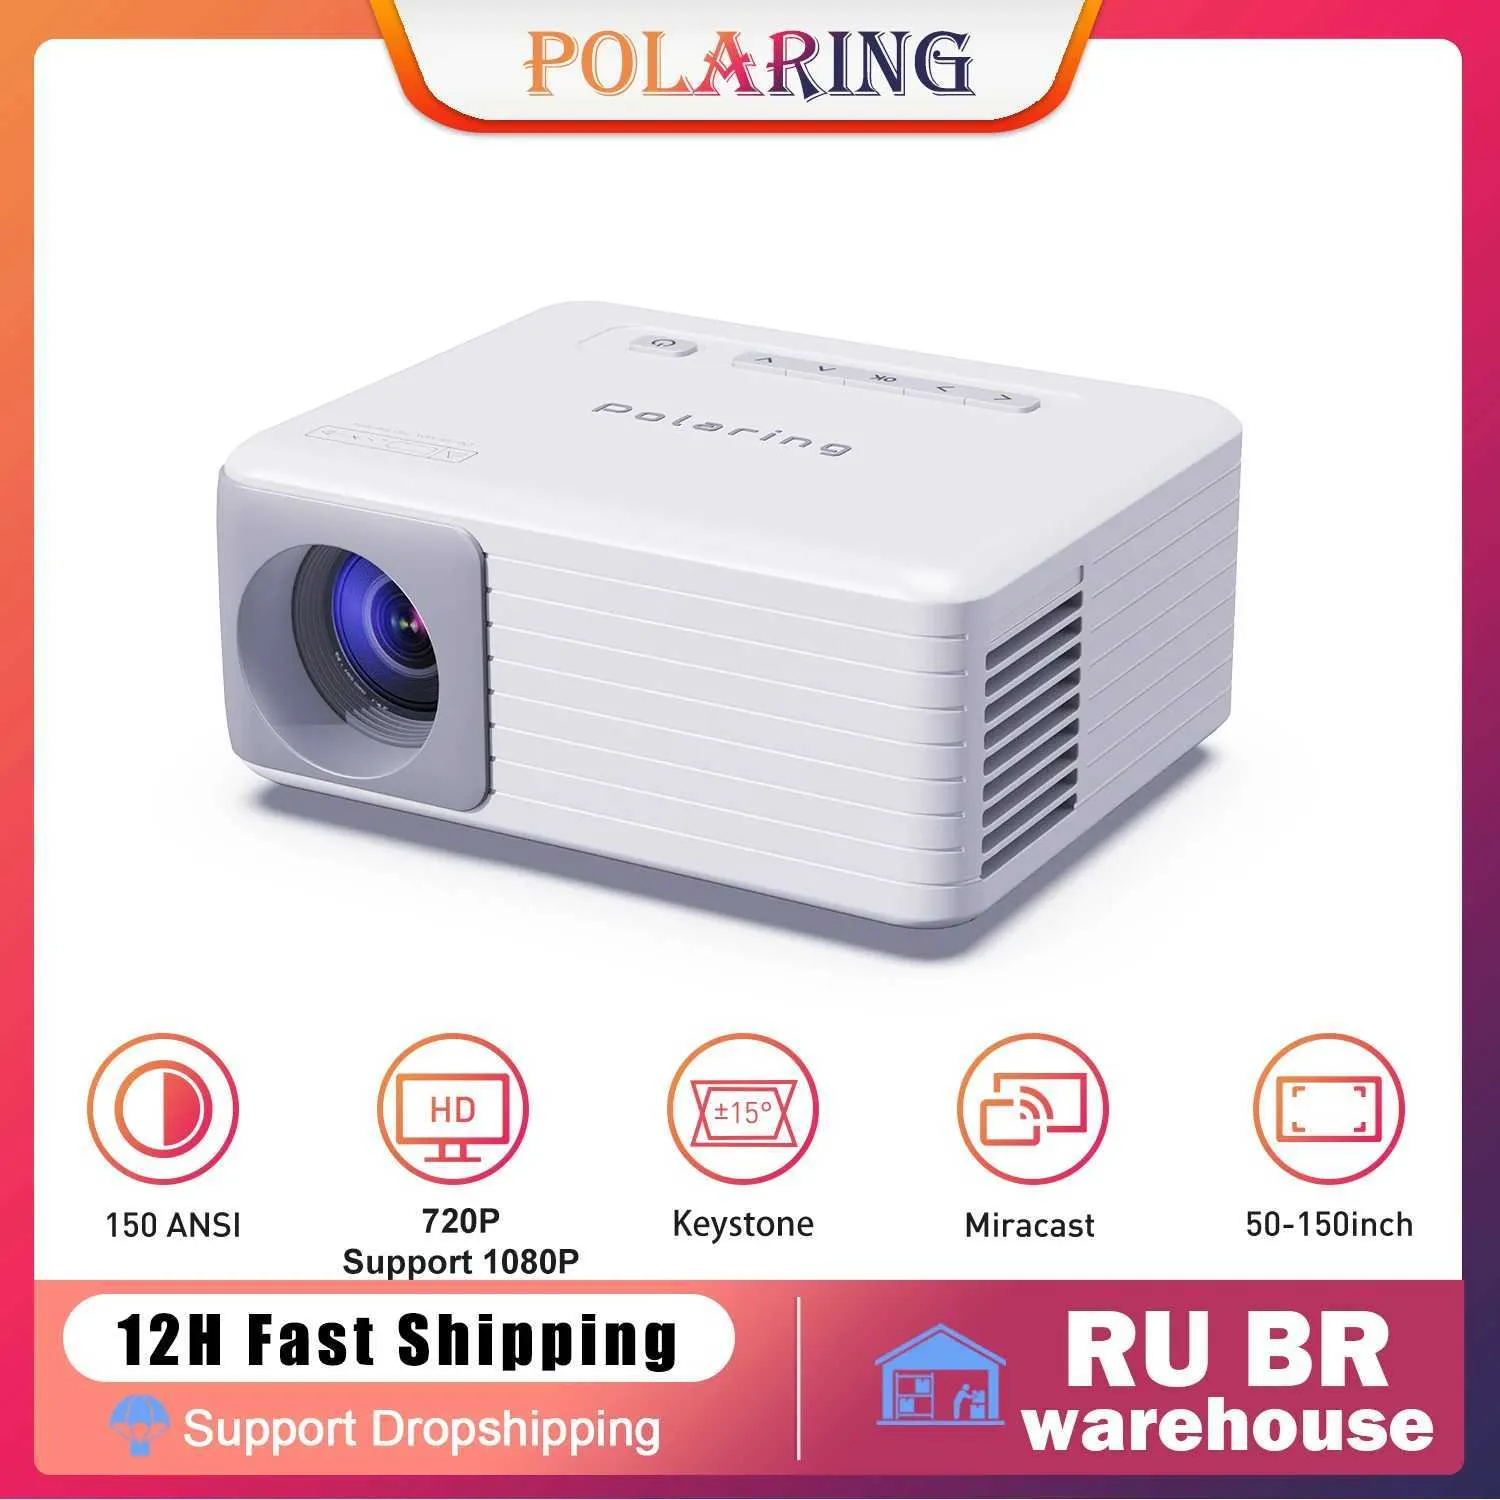 Projectors Polaring N2 720P supports 1080P digital projector video projector Keystone focuses on 5000 lumens home gaming screen camping projector J240509